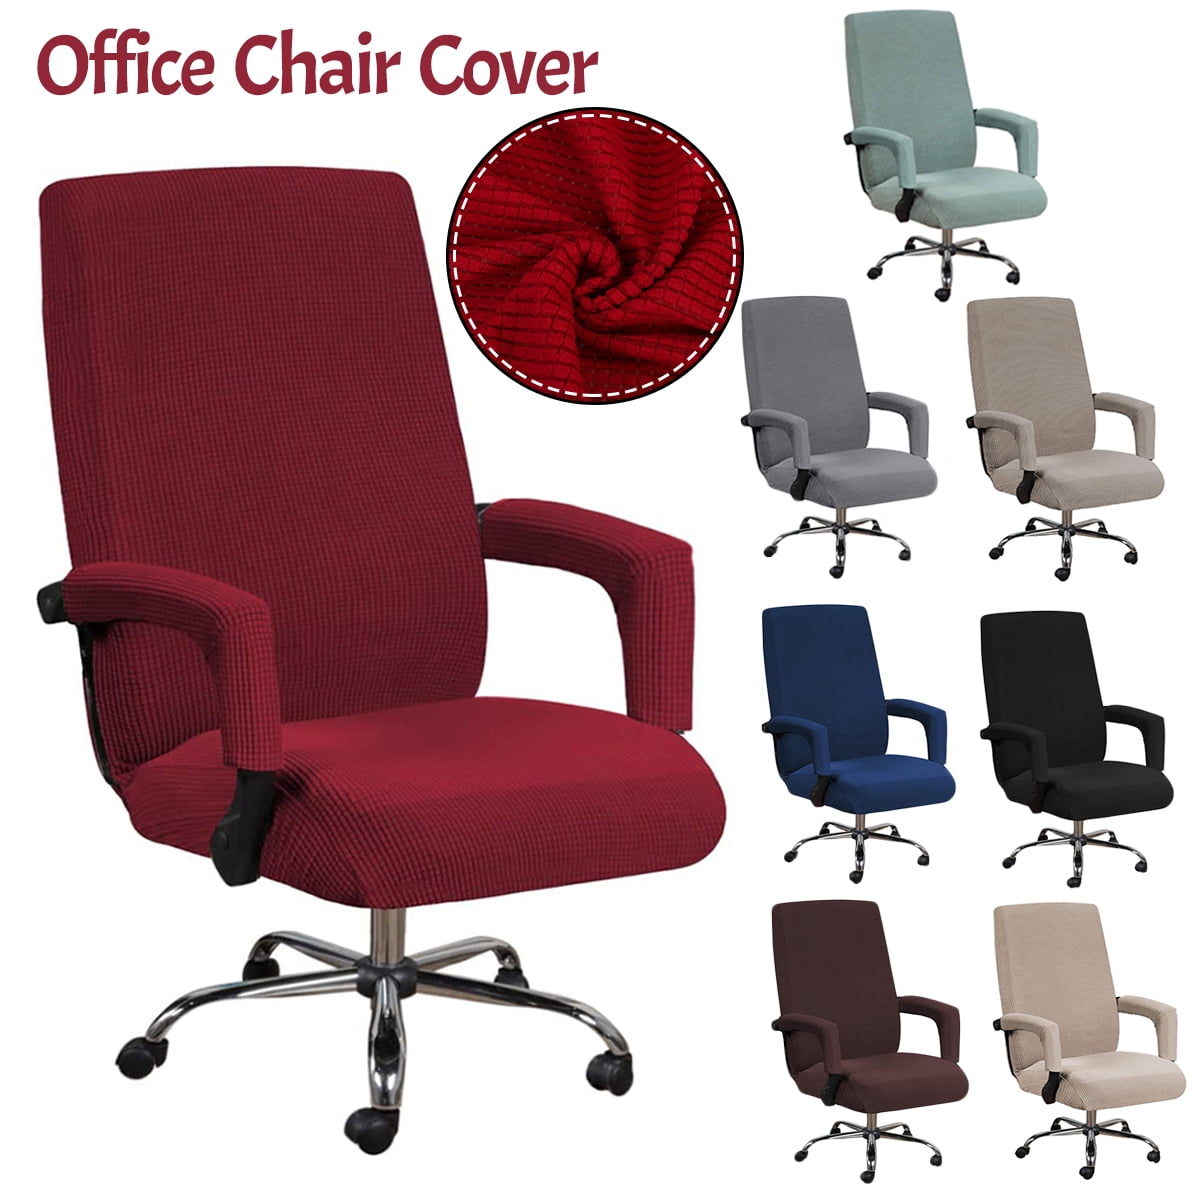 Details about   Office Chair Armrest Cover Removable Elastic Washable Waterproof Fabric